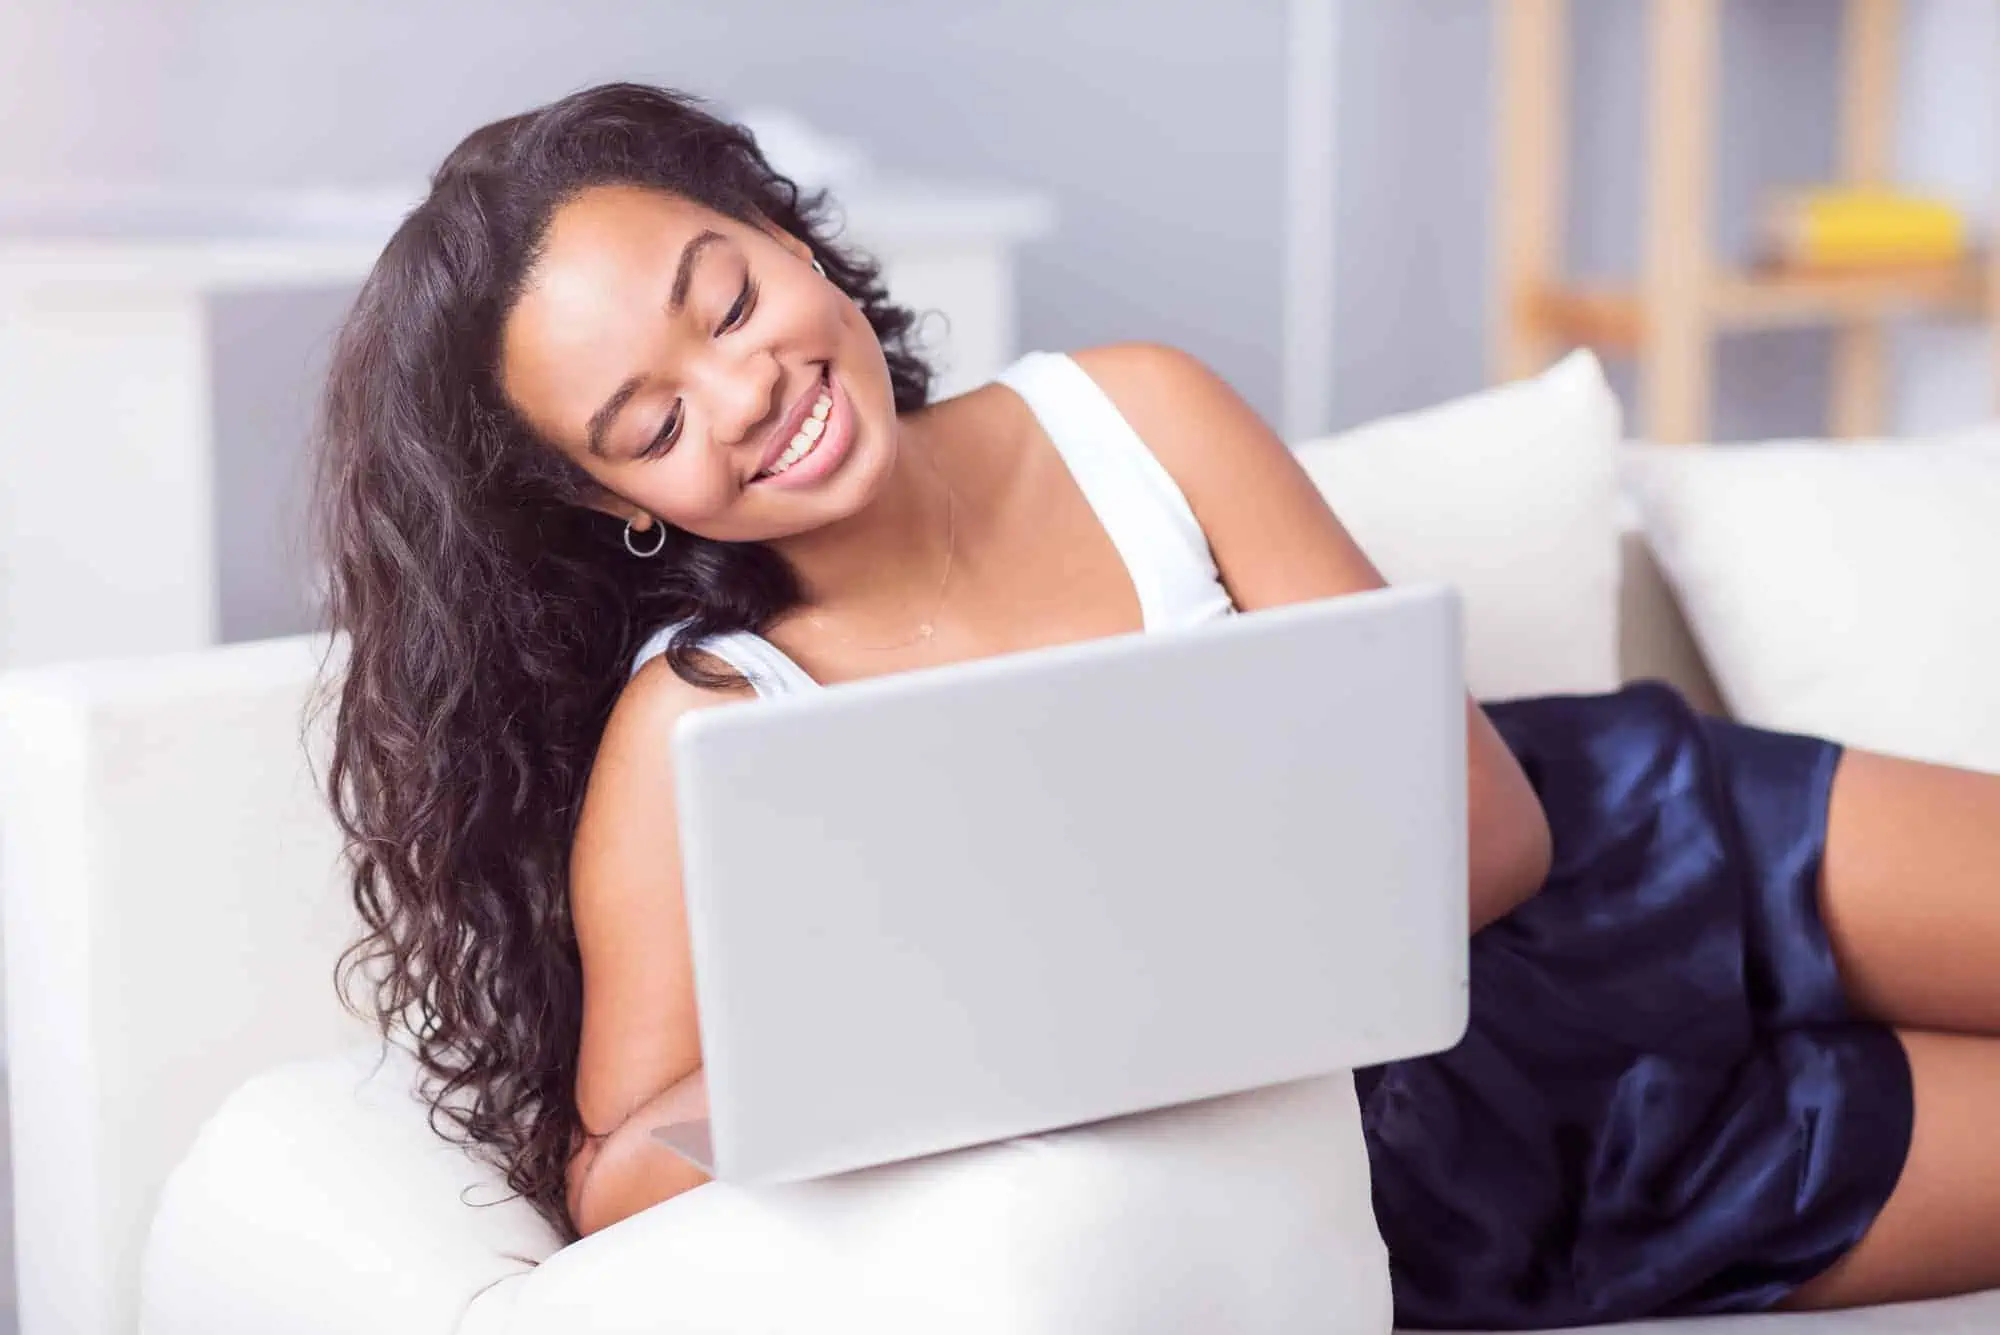 A woman laying on a couch using a laptop